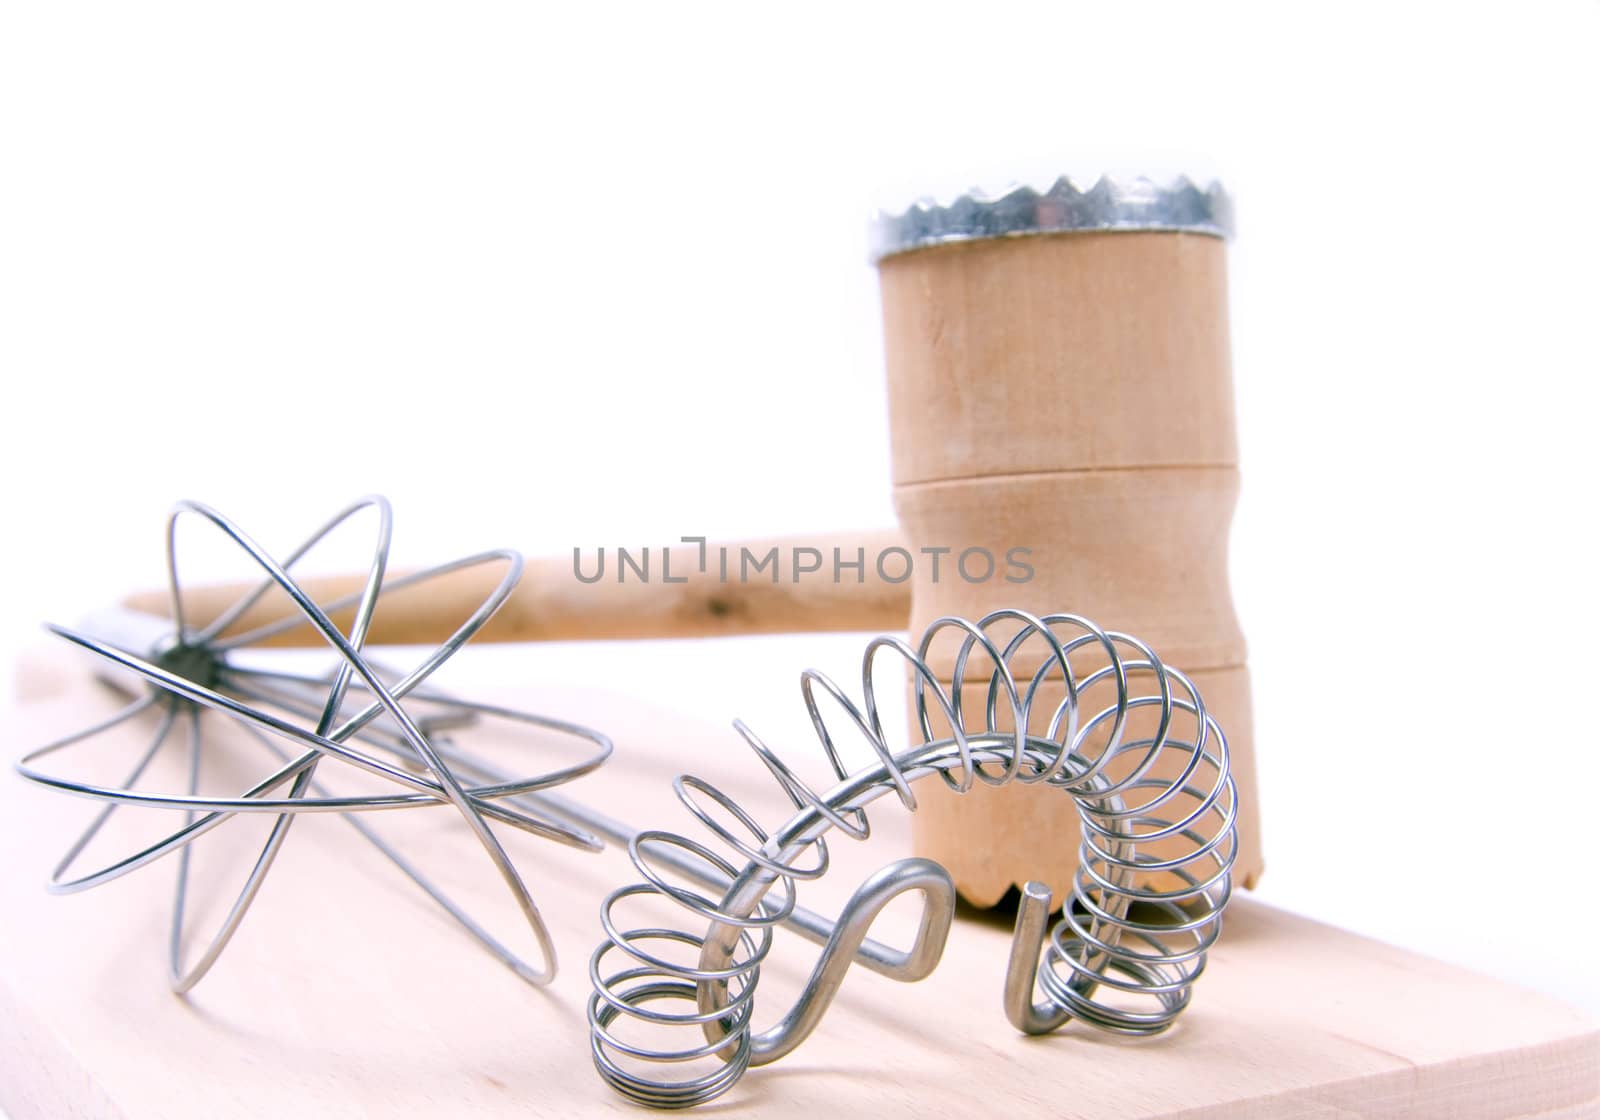 Kitchen utensil set. Meat tenderizer with egg whisks lying on kitchen board. Isolated on white.